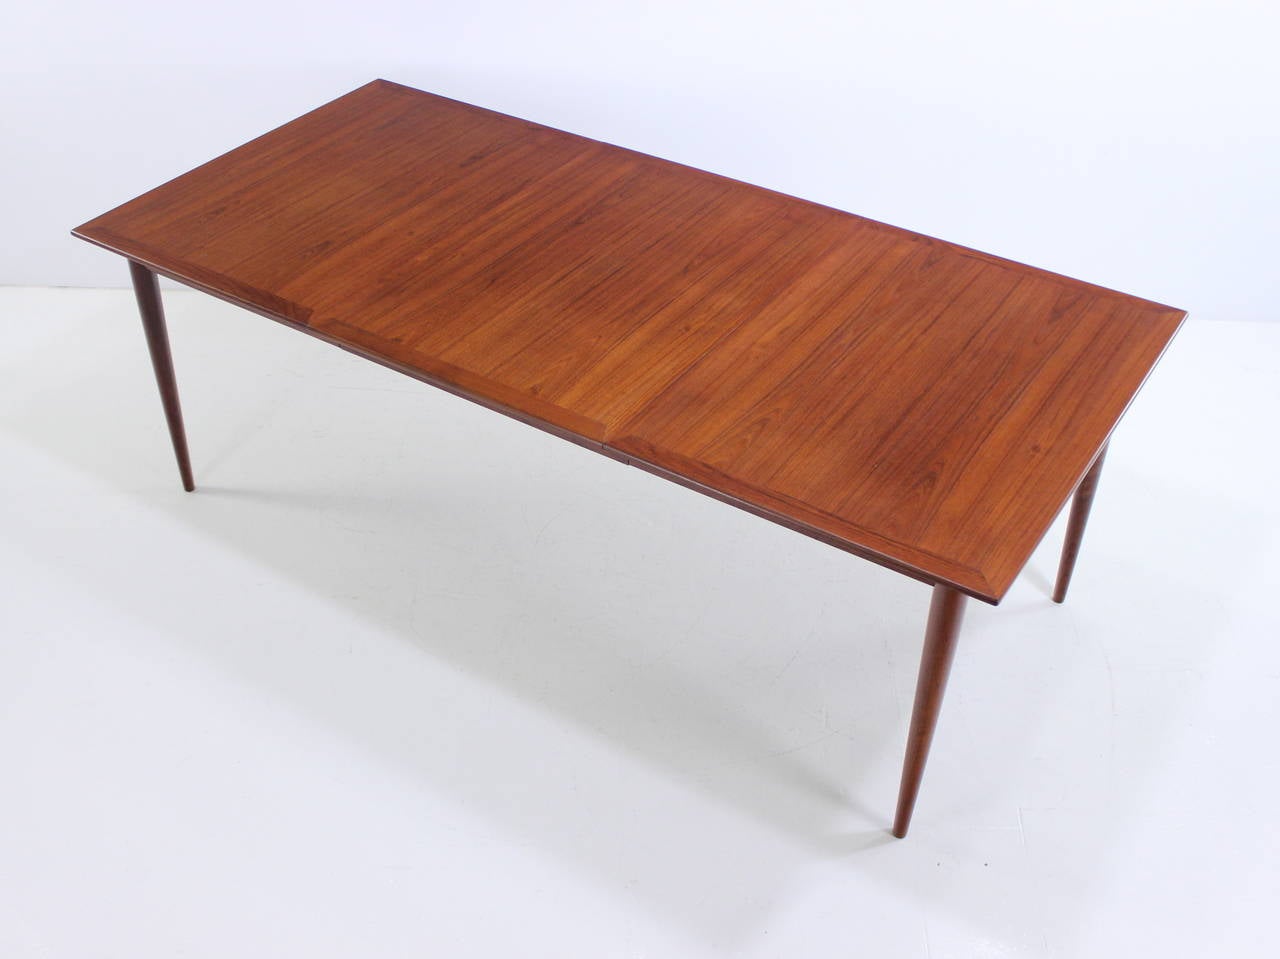 20th Century Extremely Rare Danish Modern Teak Dining Table Designed by Grete Jalk For Sale